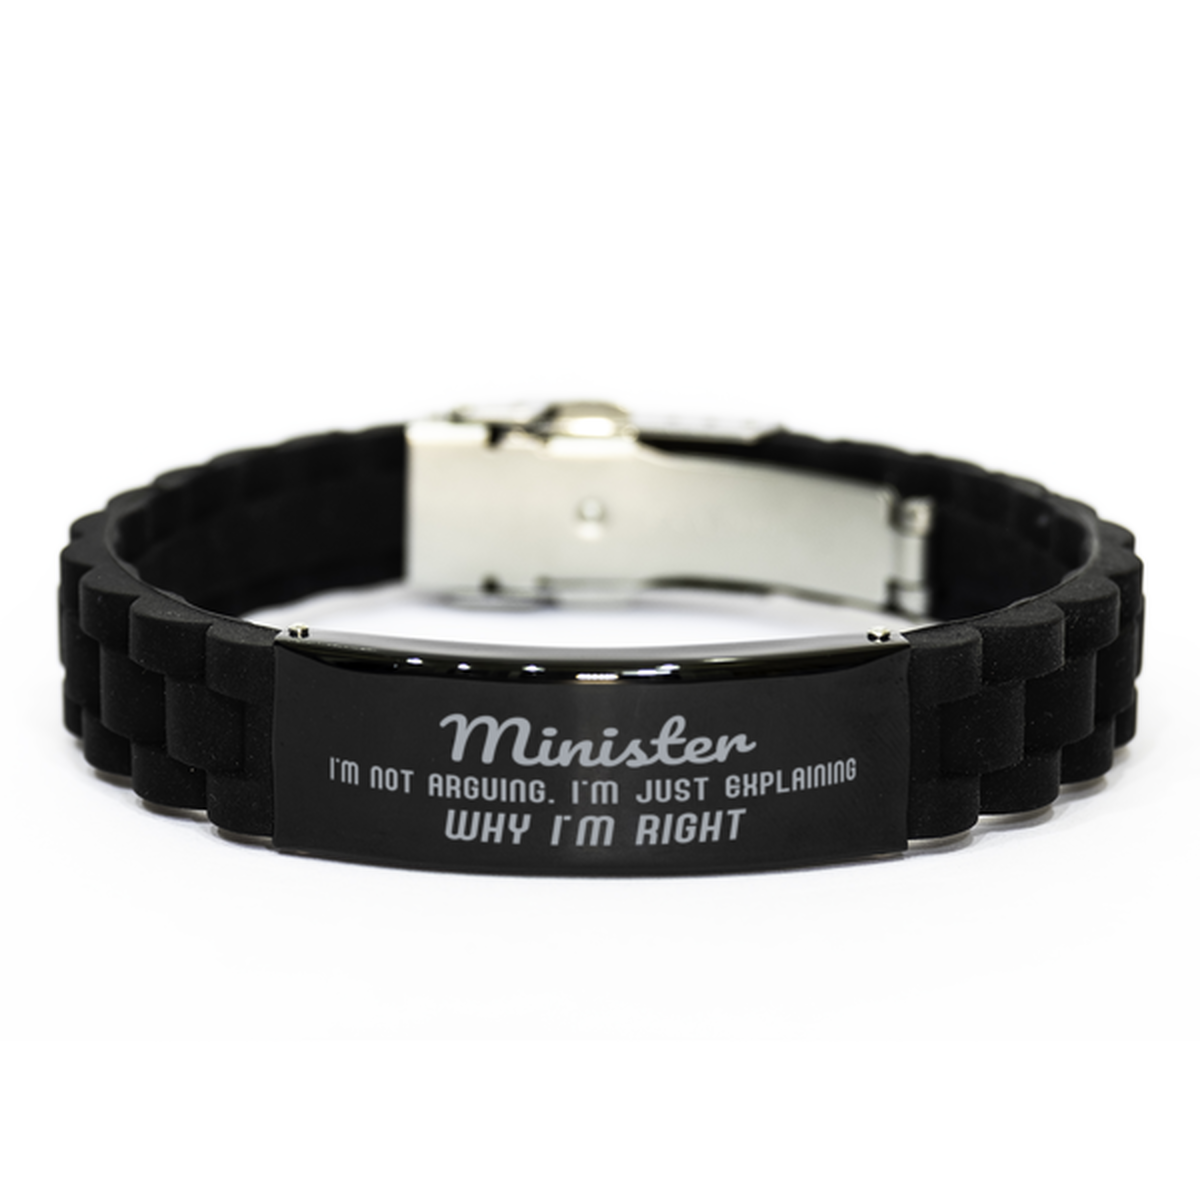 Minister I'm not Arguing. I'm Just Explaining Why I'm RIGHT Black Glidelock Clasp Bracelet, Funny Saying Quote Minister Gifts For Minister Graduation Birthday Christmas Gifts for Men Women Coworker